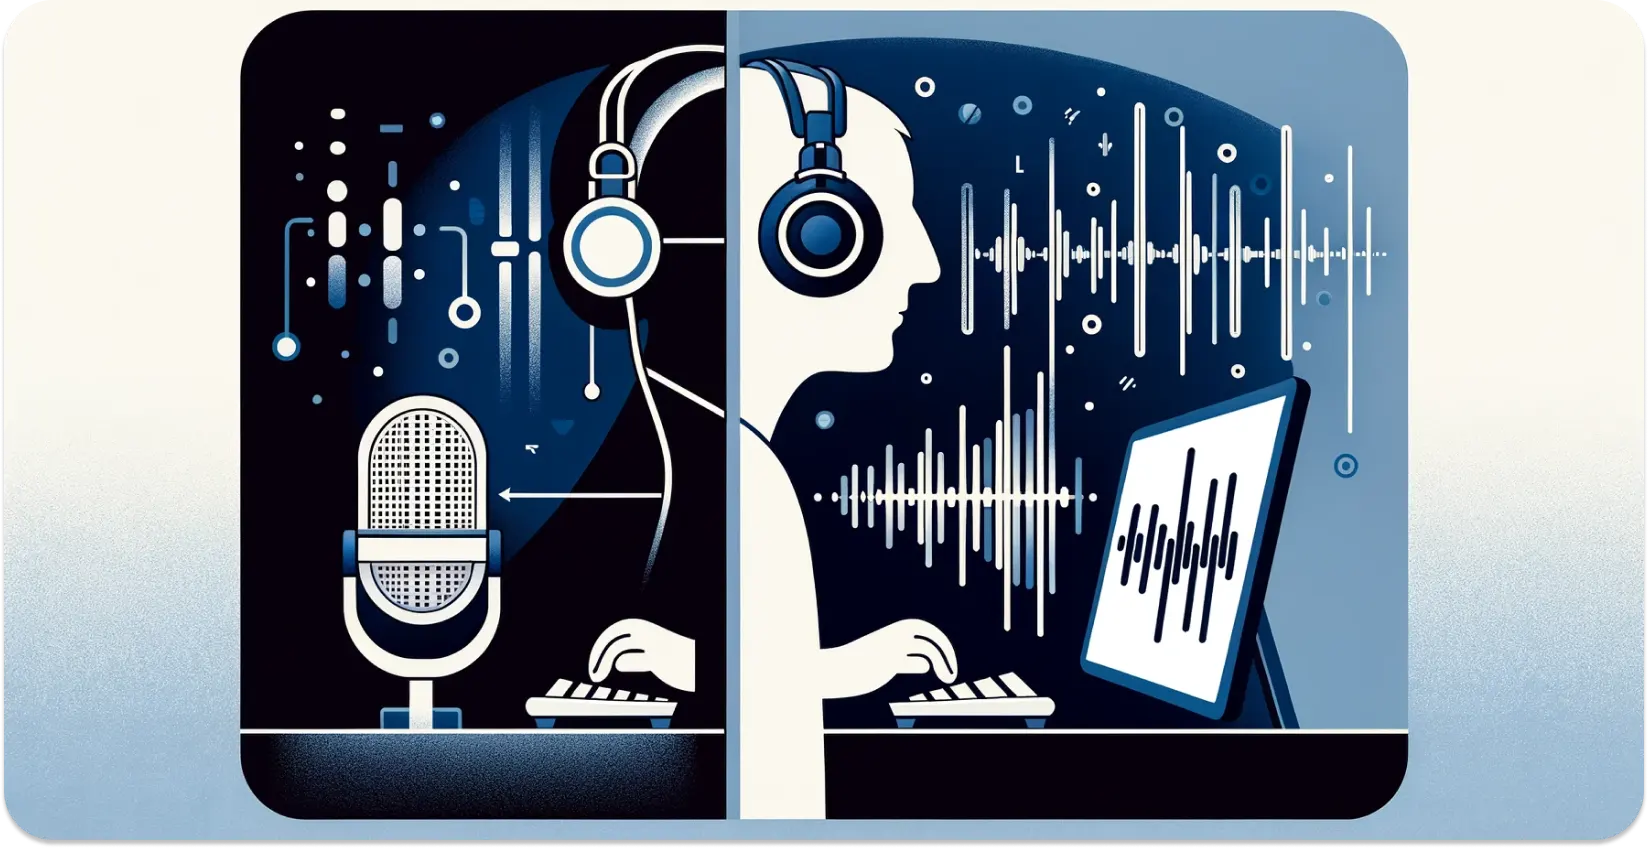 Stylized depiction of a person with headphones transcribing audio from a tablet, with visual sound waves.